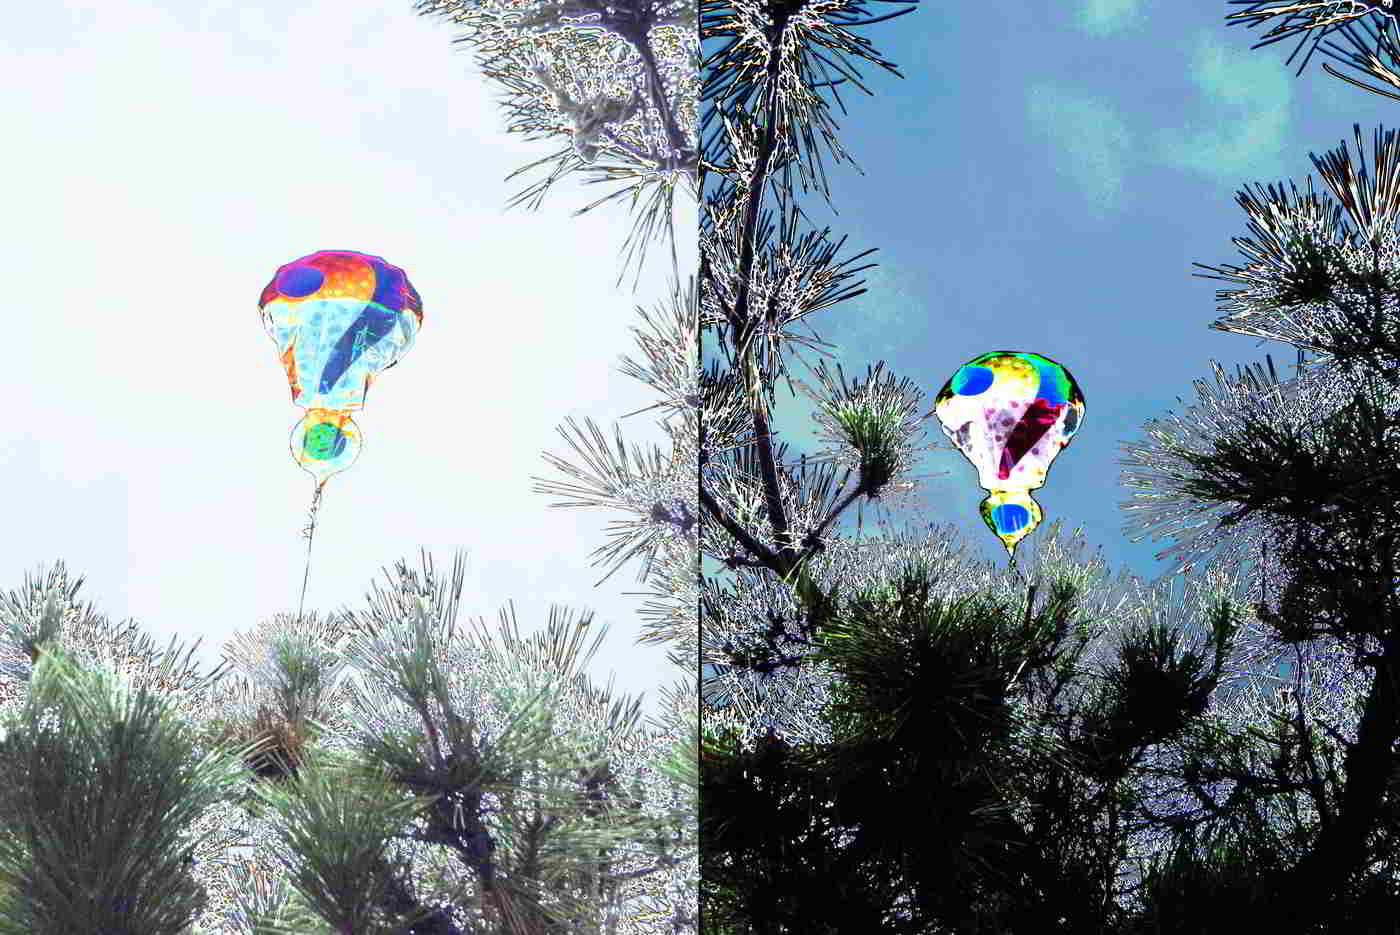 Two pictures of a color corrected gender reveal balloon next to each other. One picture has tree branches below, a very light sky, and an balloon with a question mark in blue, green, with the top in red. The other balloon has a deeper blue sky, with a question mark in blue and pink. 